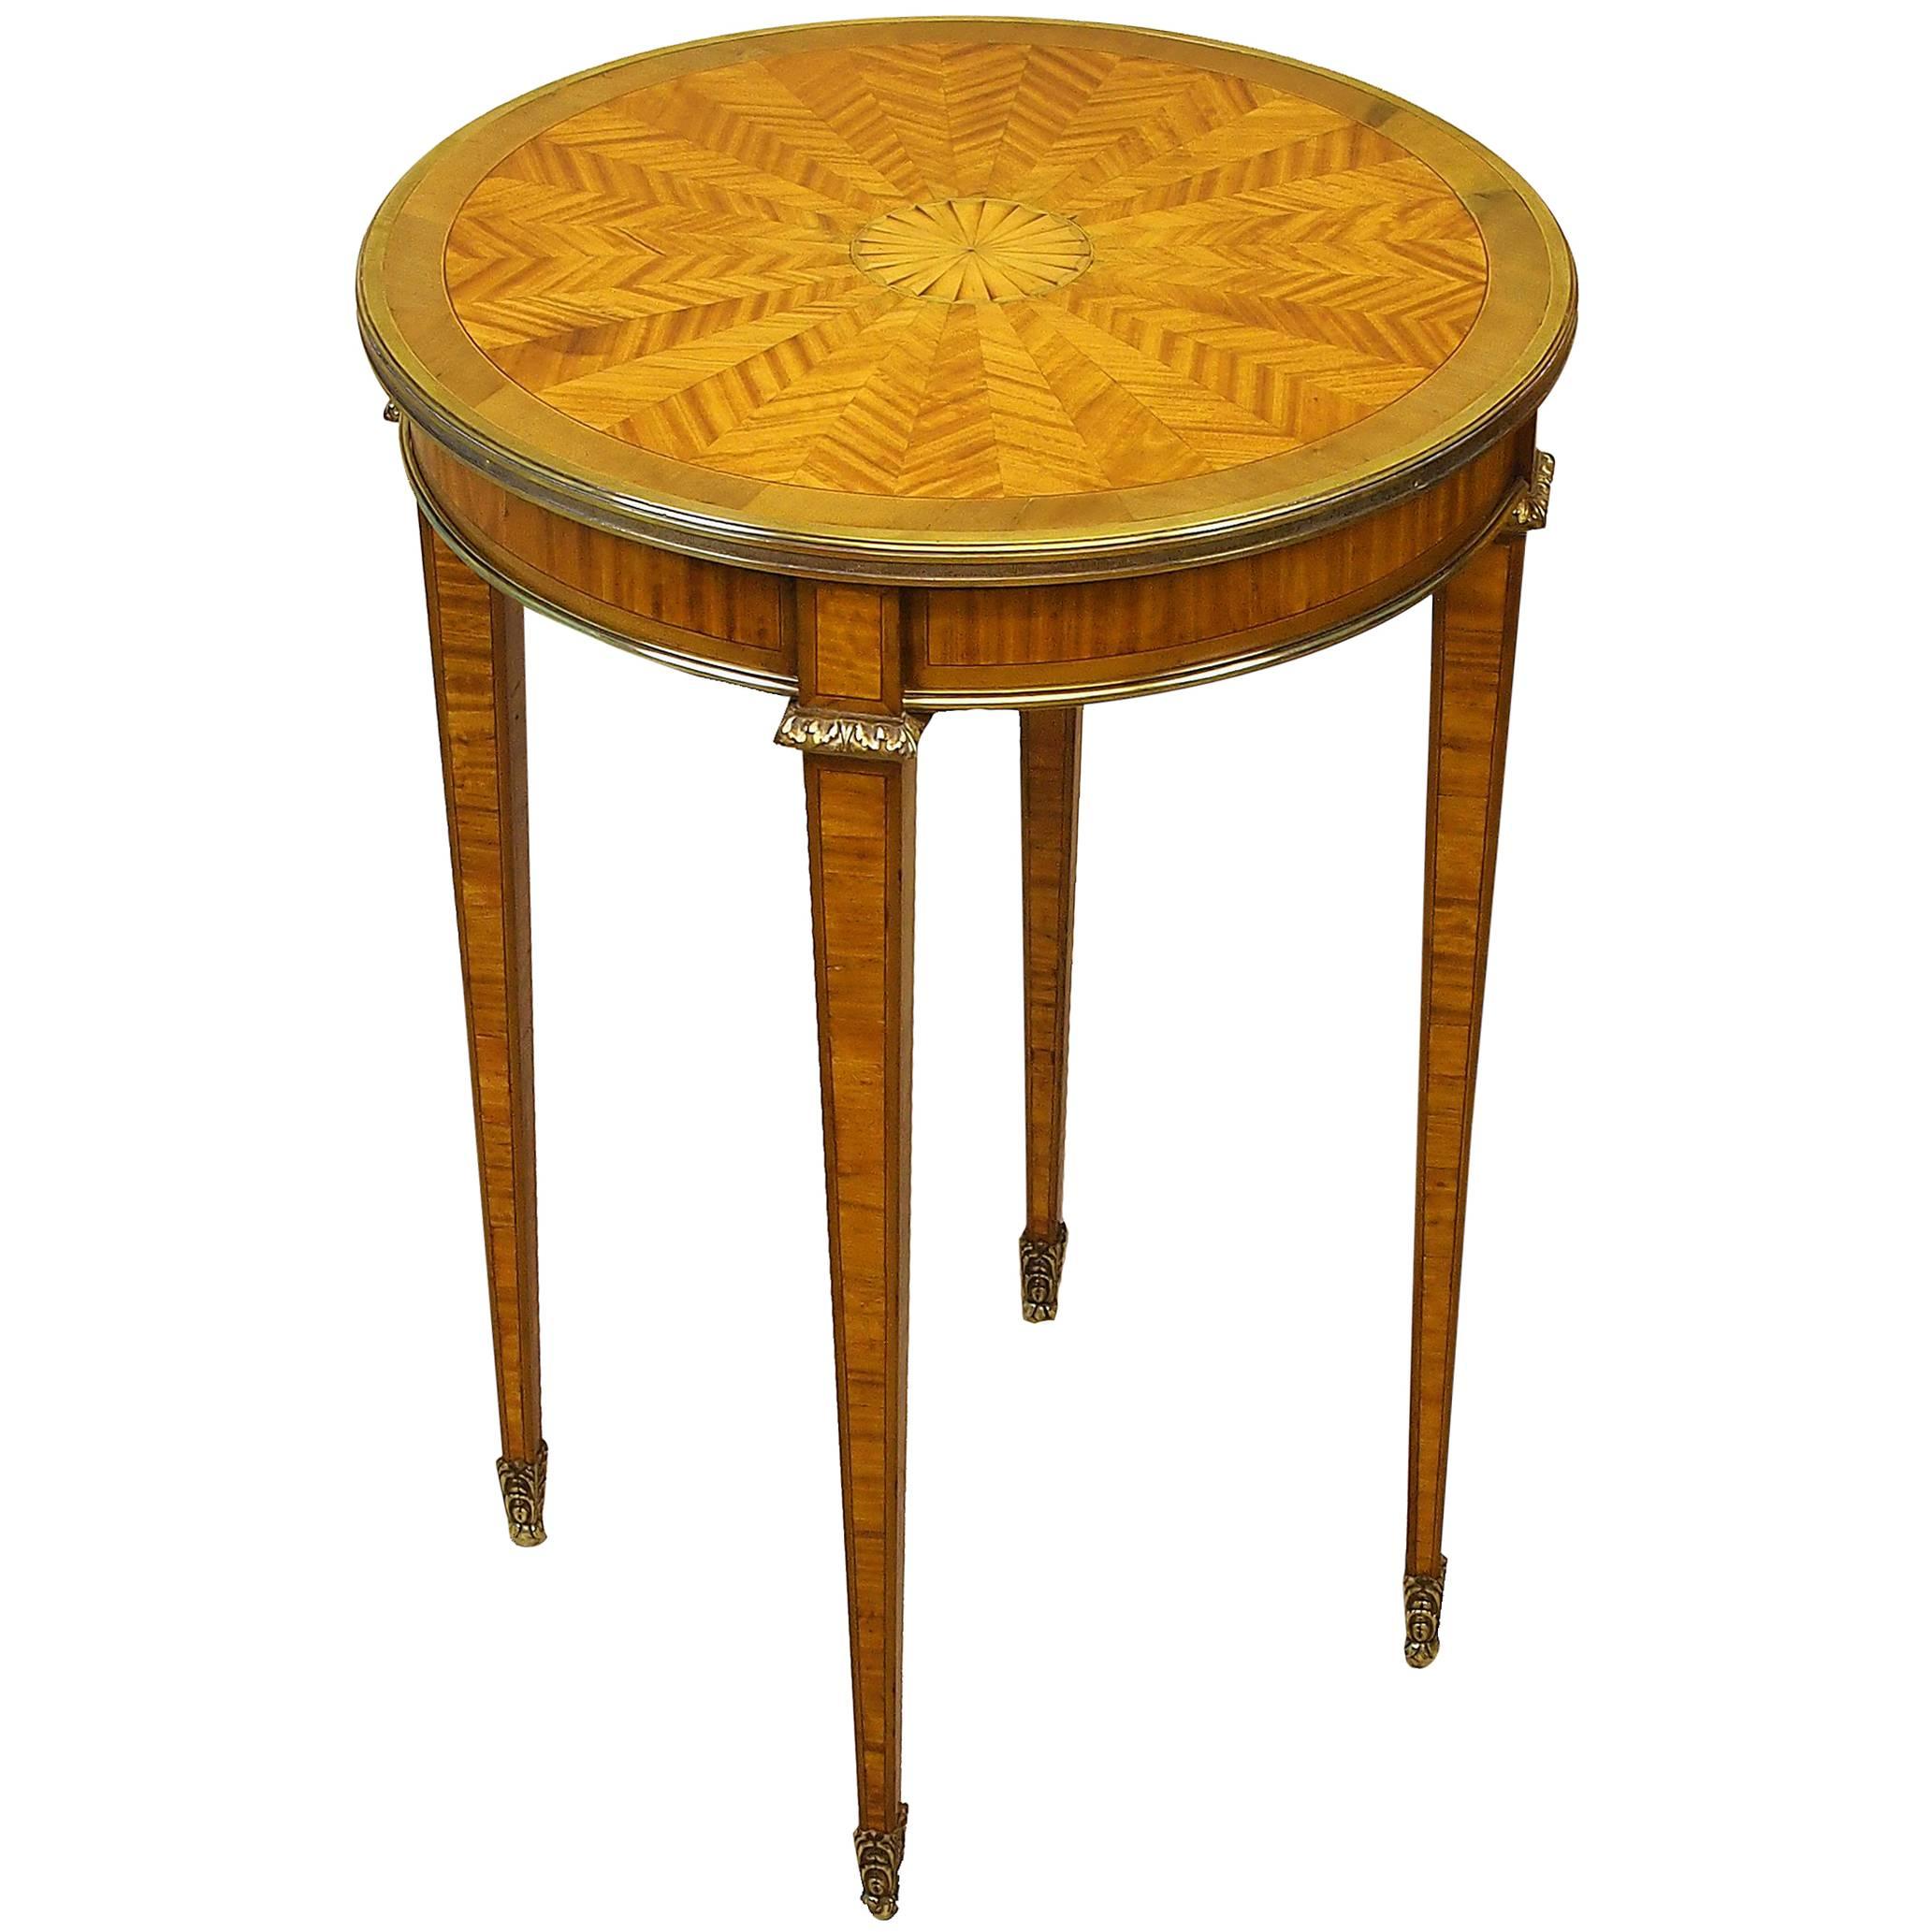 Antique 19th Century Satinwood Occasional Lamp Table